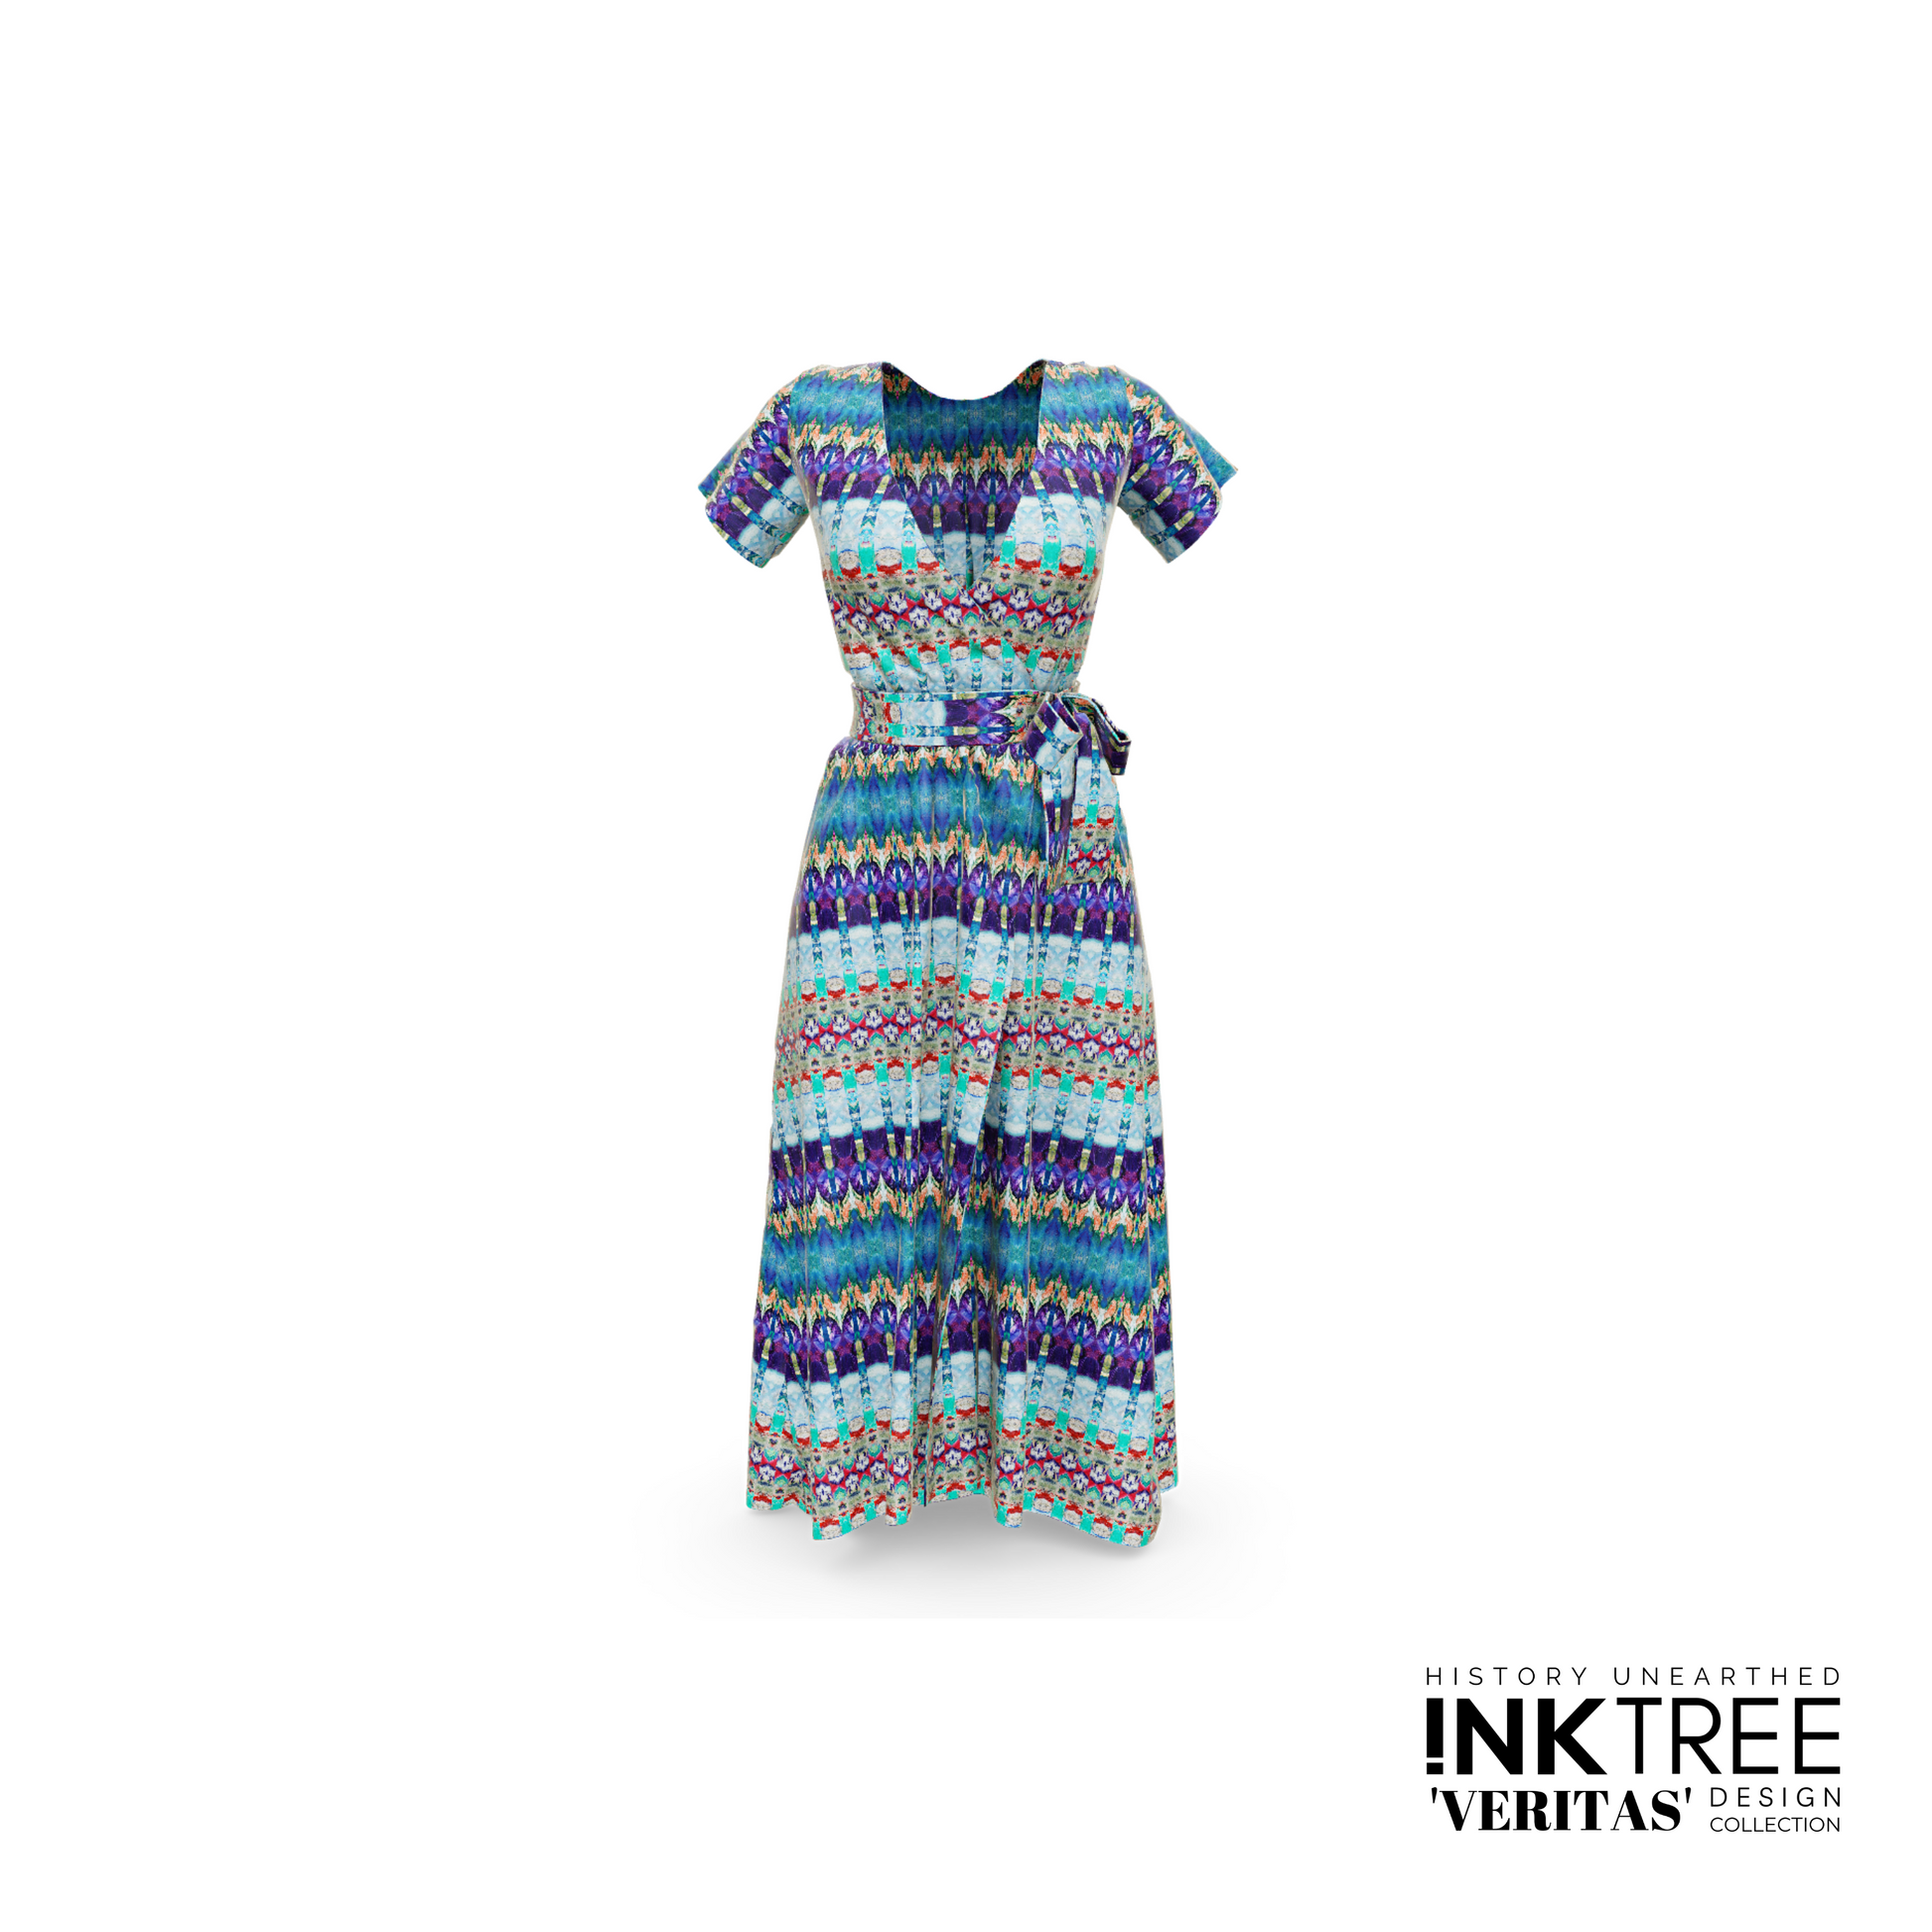 A dress with a purple, blue and green pattern.